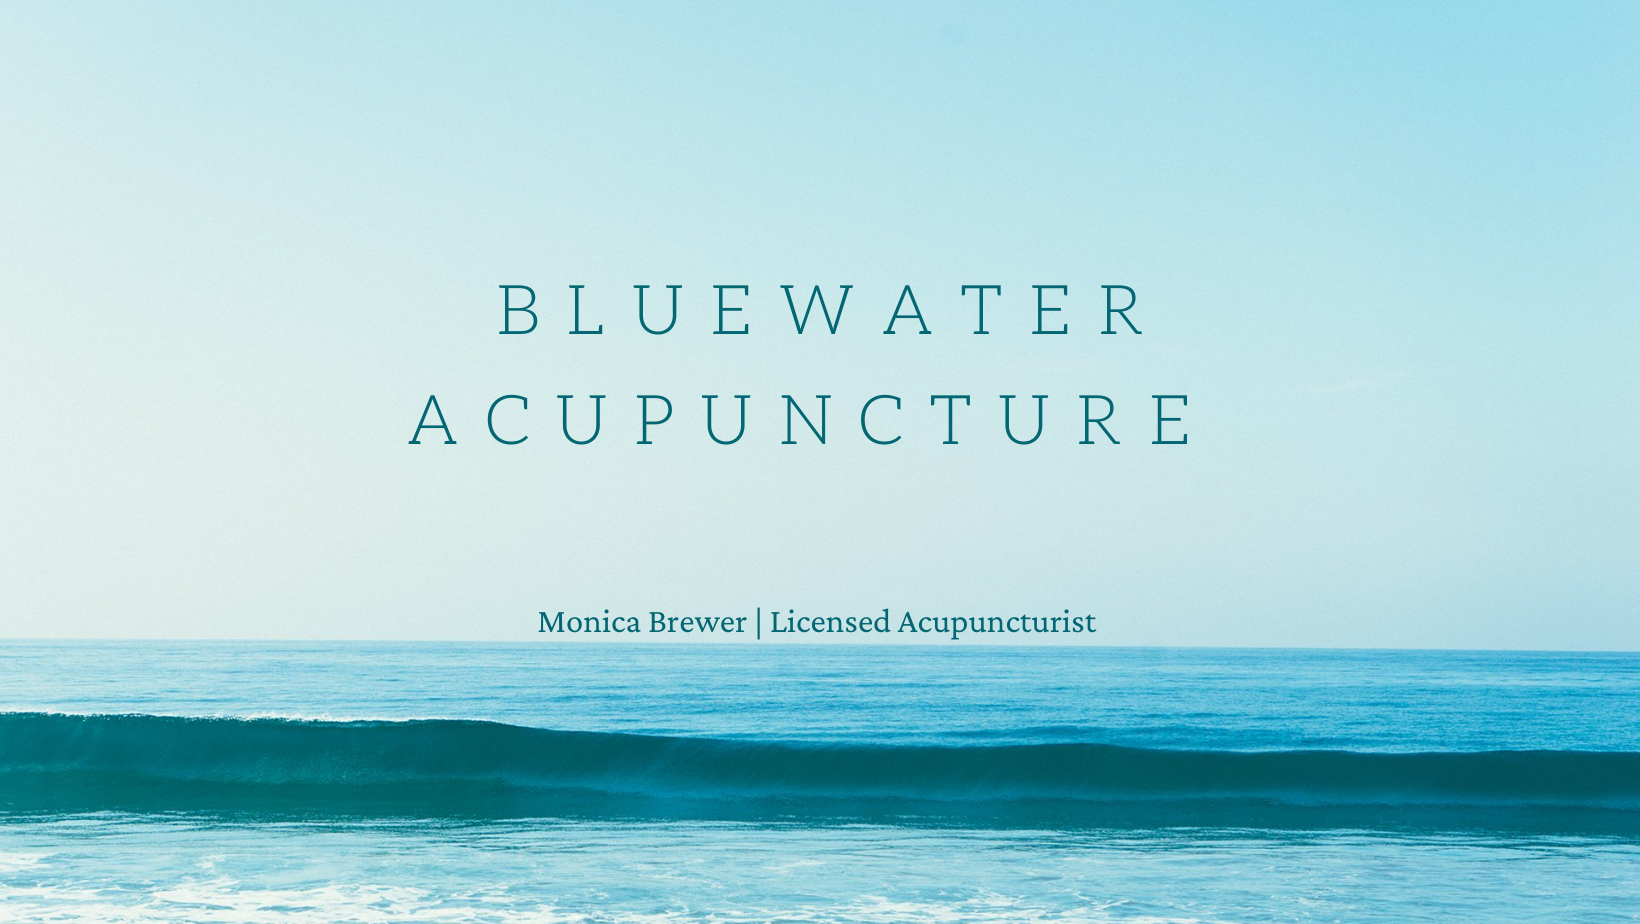 Bluewater Acupuncture